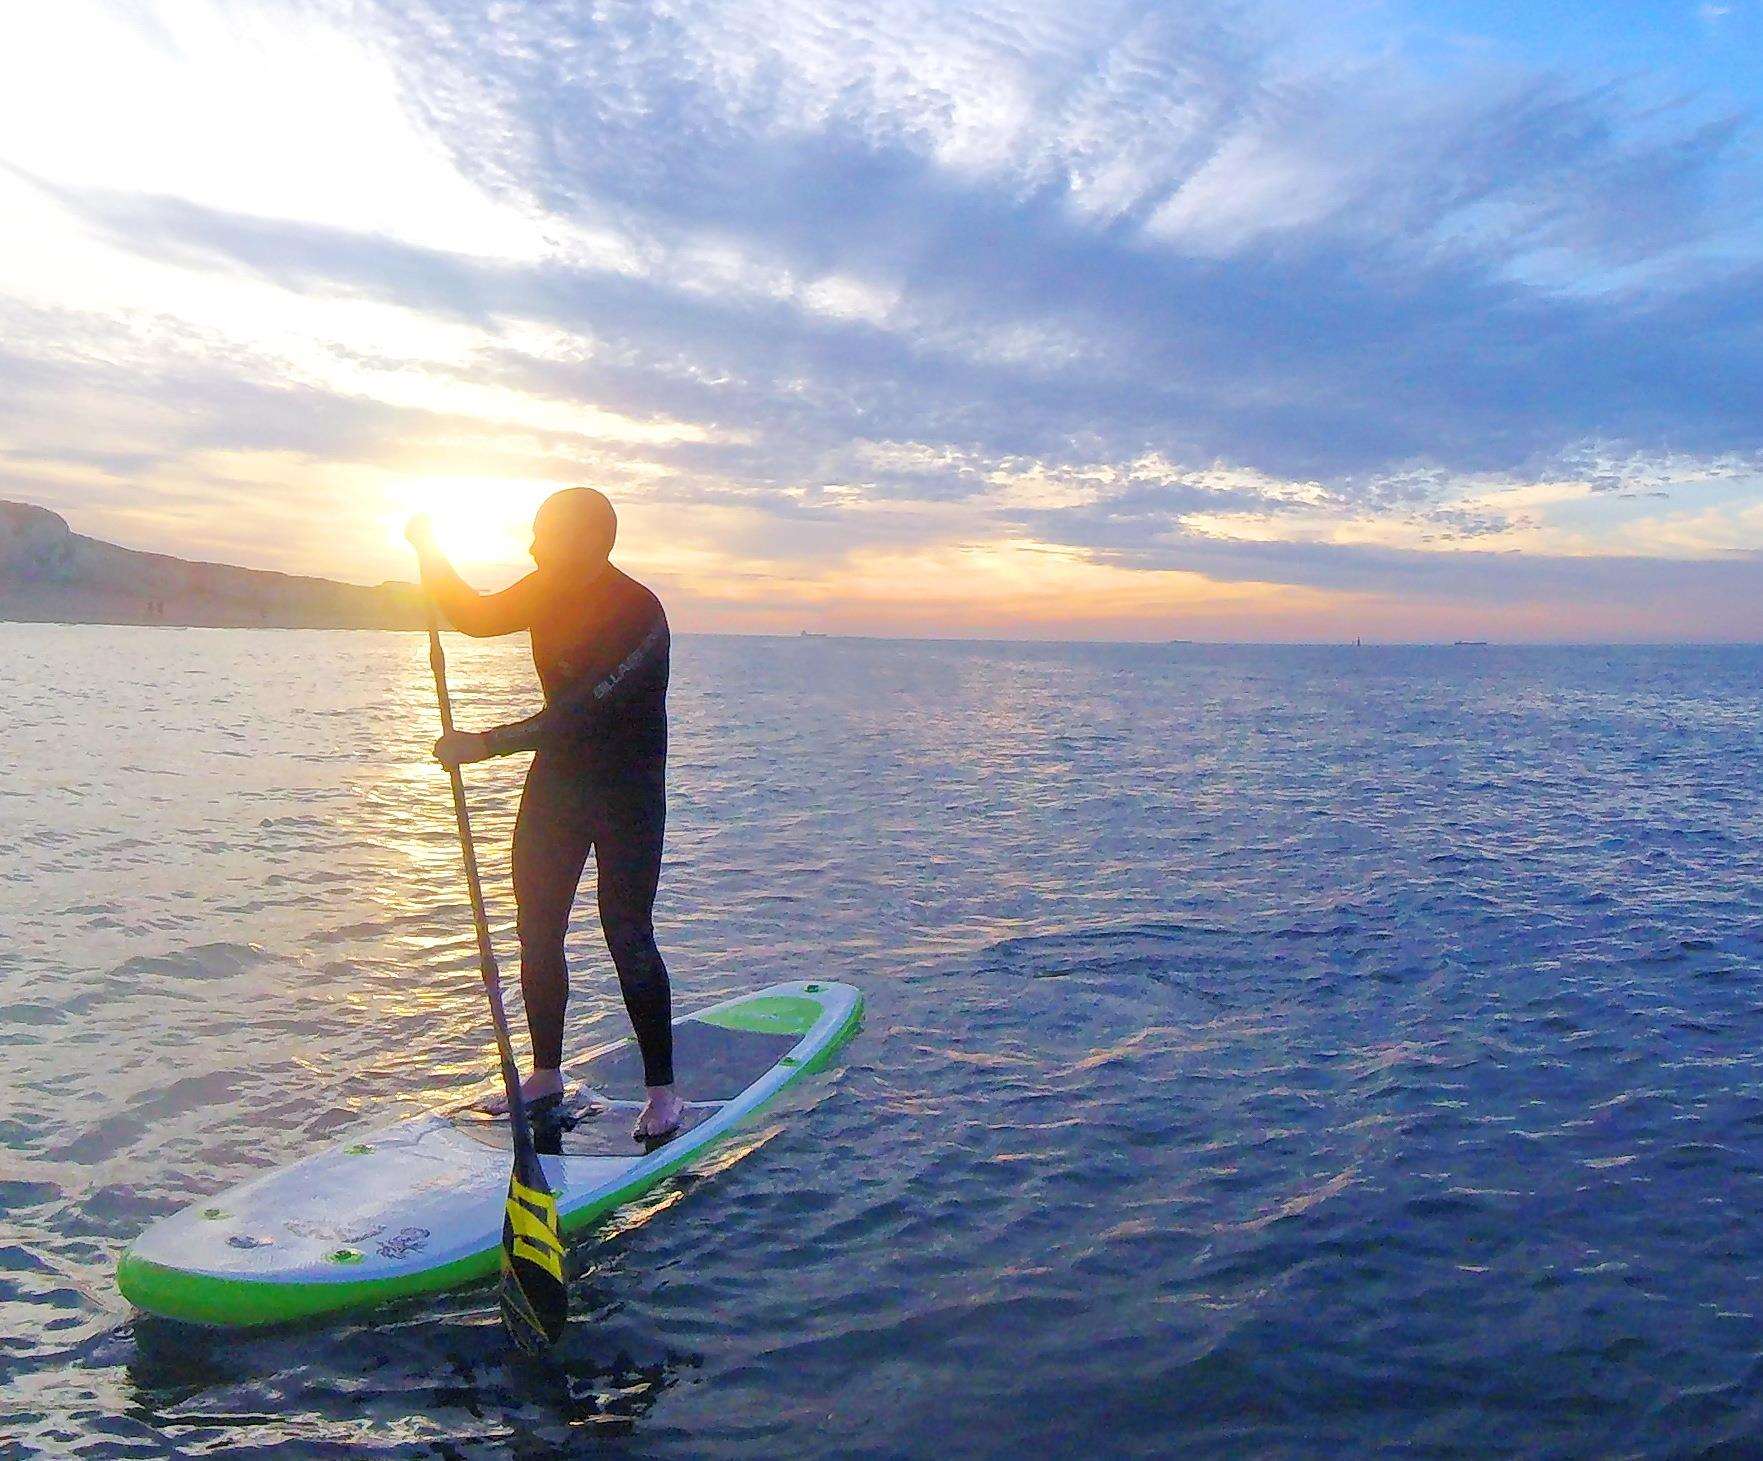 Andy Short is hoping to paddleboard solo across the English Channel